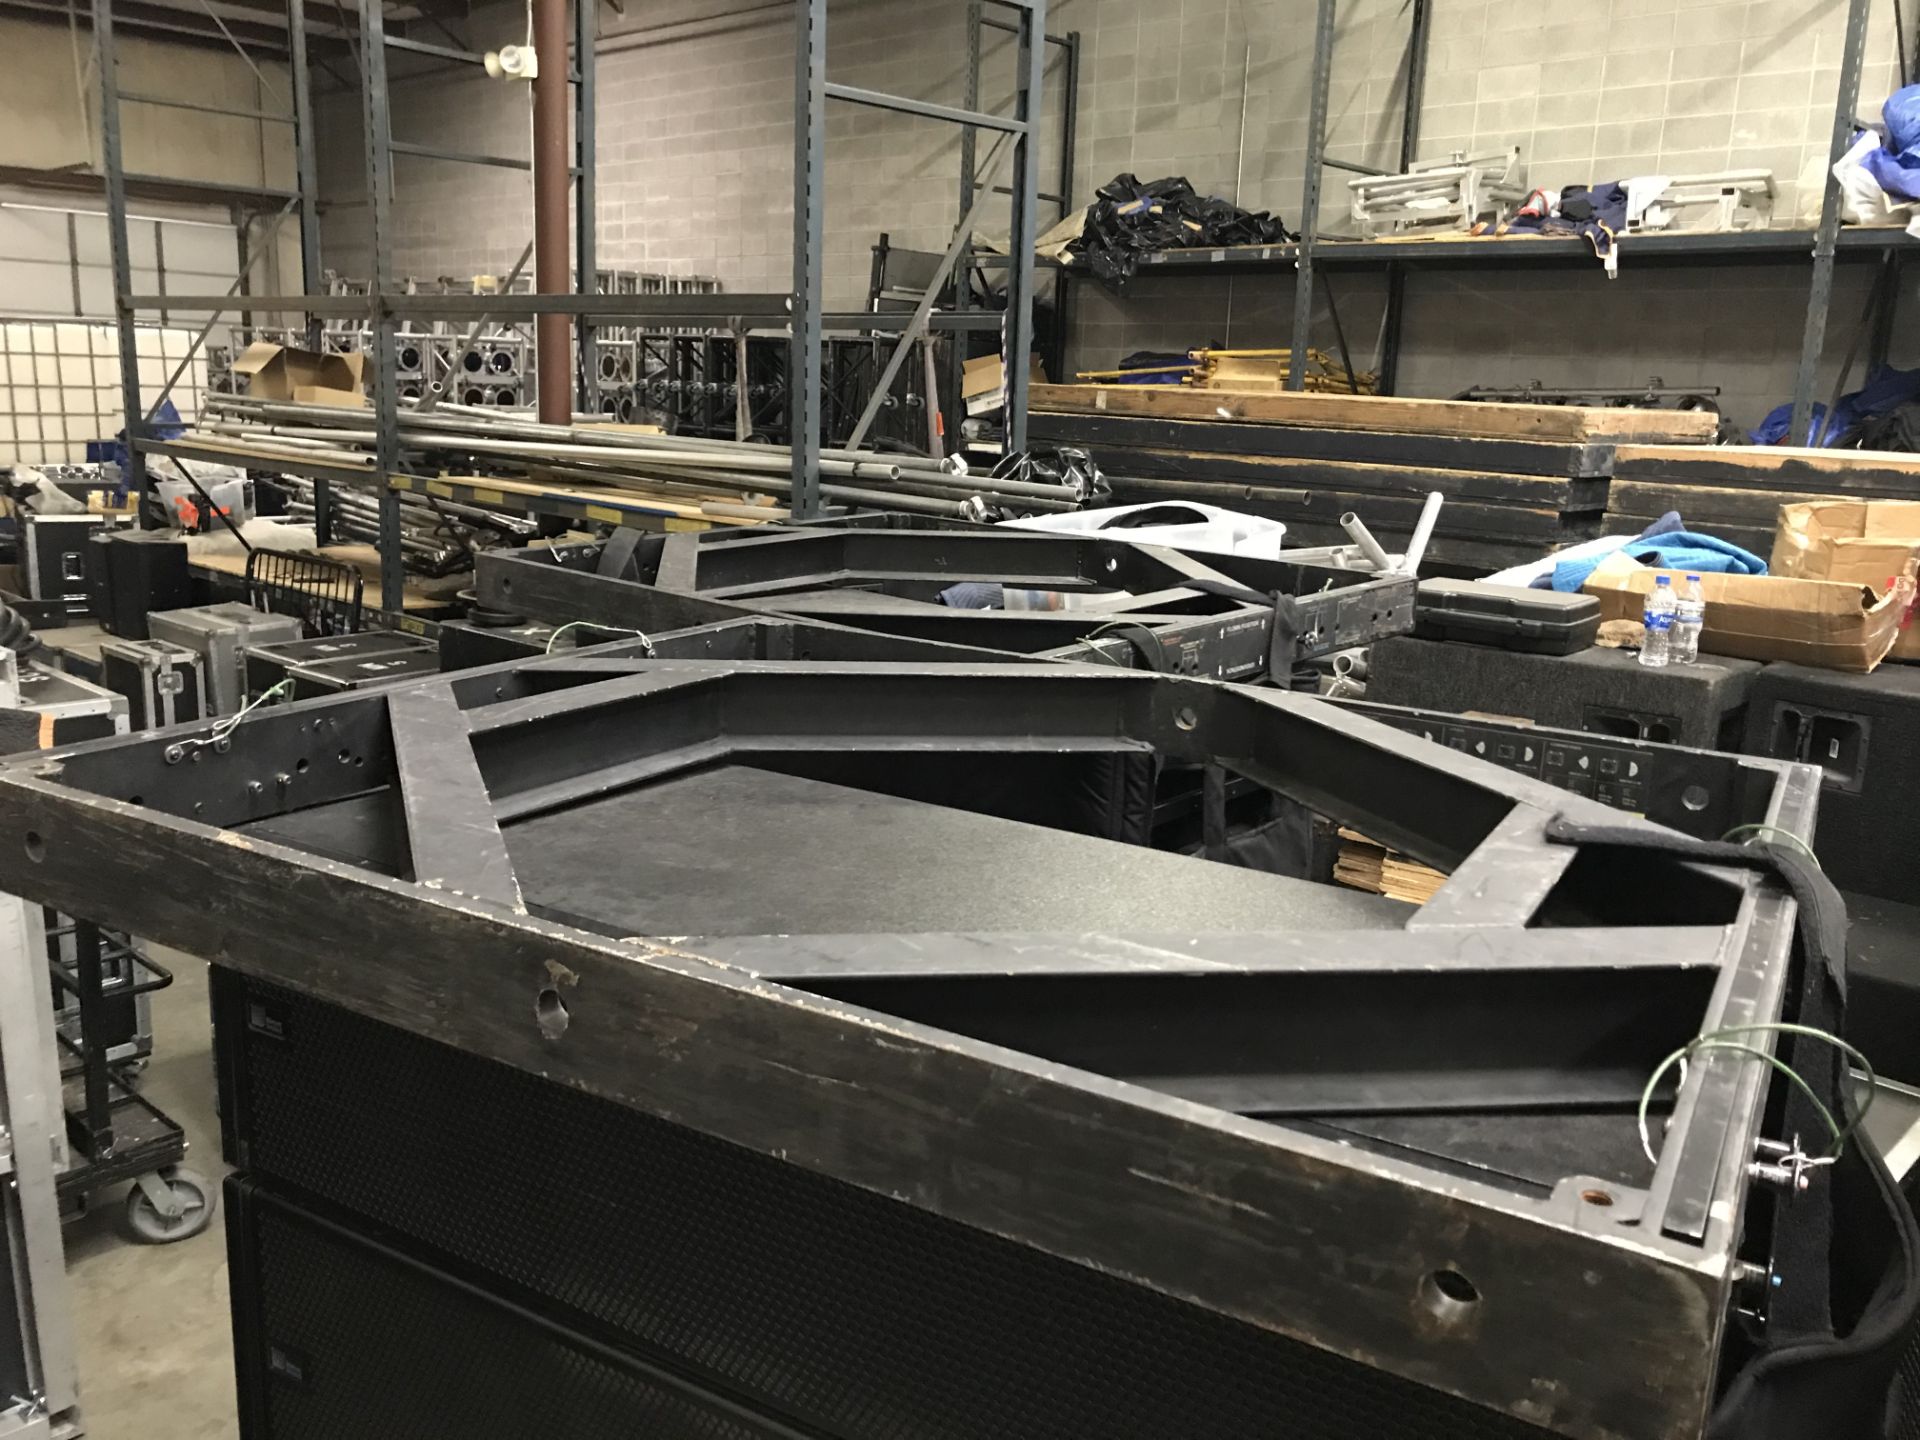 LOT OF: (4) MEYER SOUND, MILO HP MONITORS W/ ROLLING CART AND (1) 43" X 54" STEEL FRAME GROUNDSTACK - Image 12 of 12